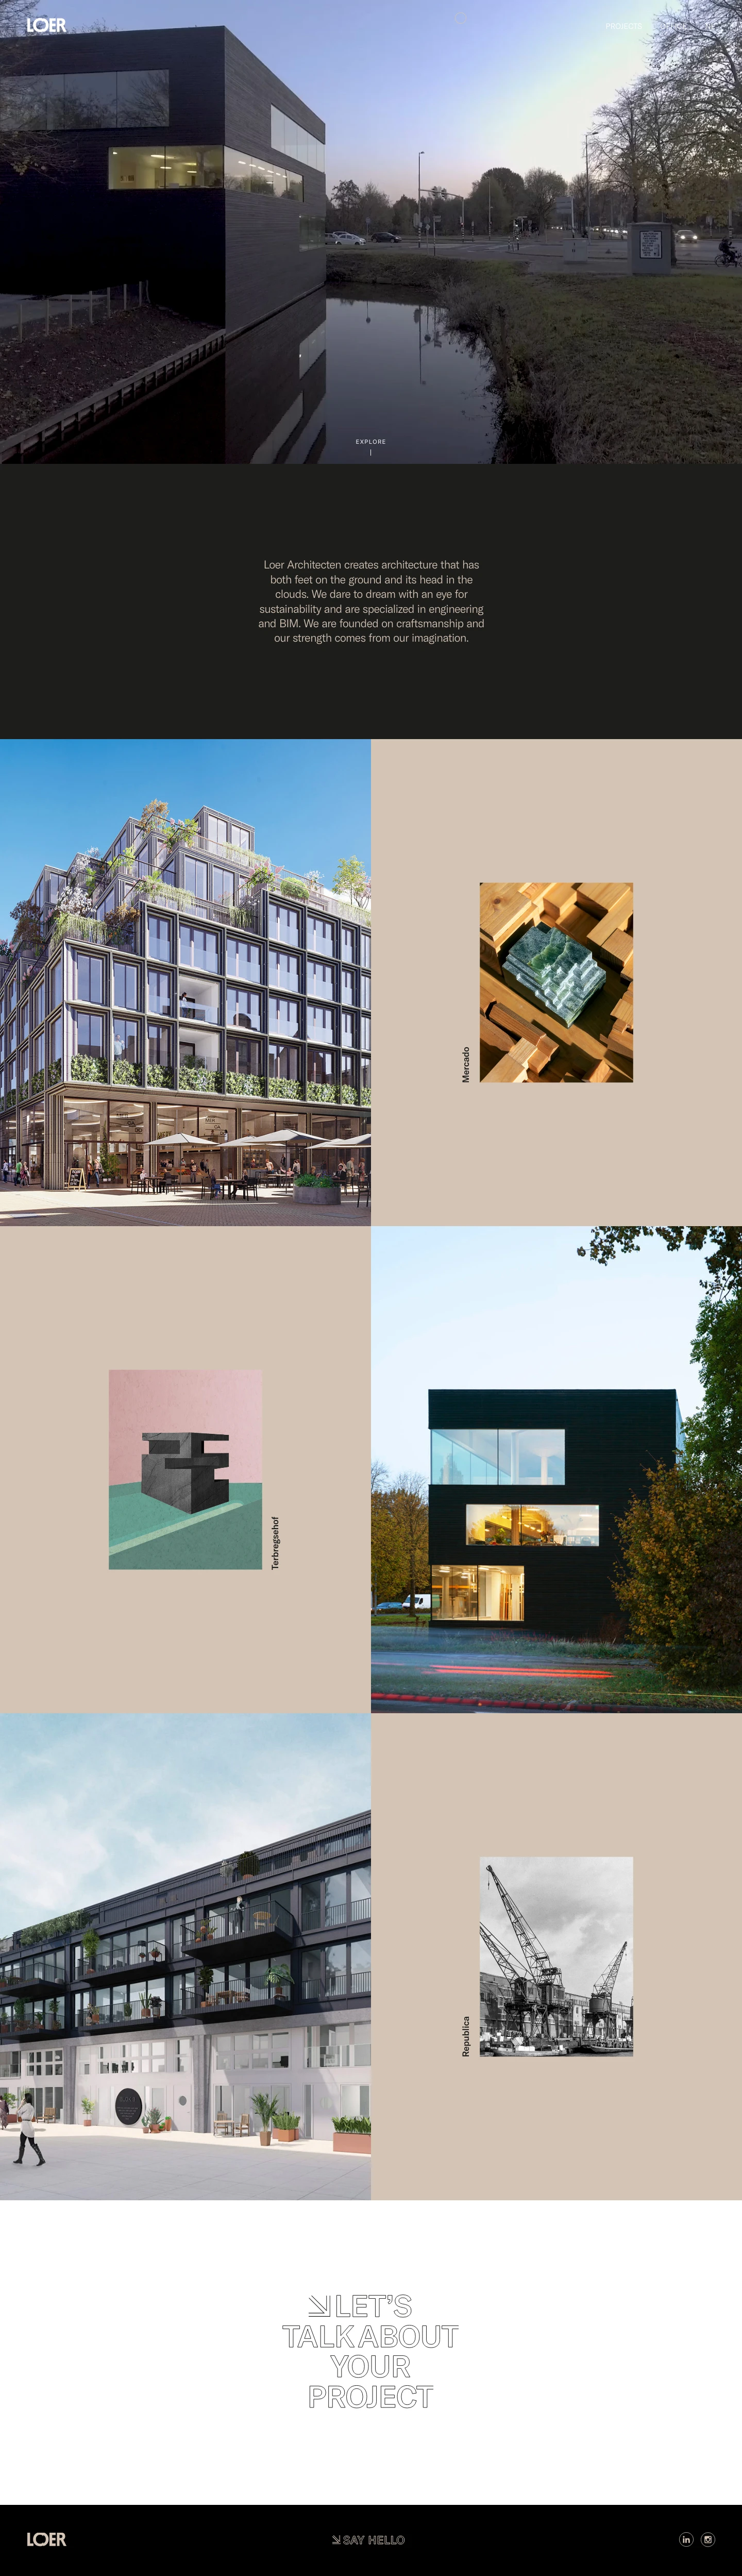 Loer Architecten Landing Page Example: Loer Architecten creates architecture with both feet on the ground and their heads in the clouds. Our foundation is craftsmanship, our strength is the art of imagination. We believe that architecture can transcend the everyday.